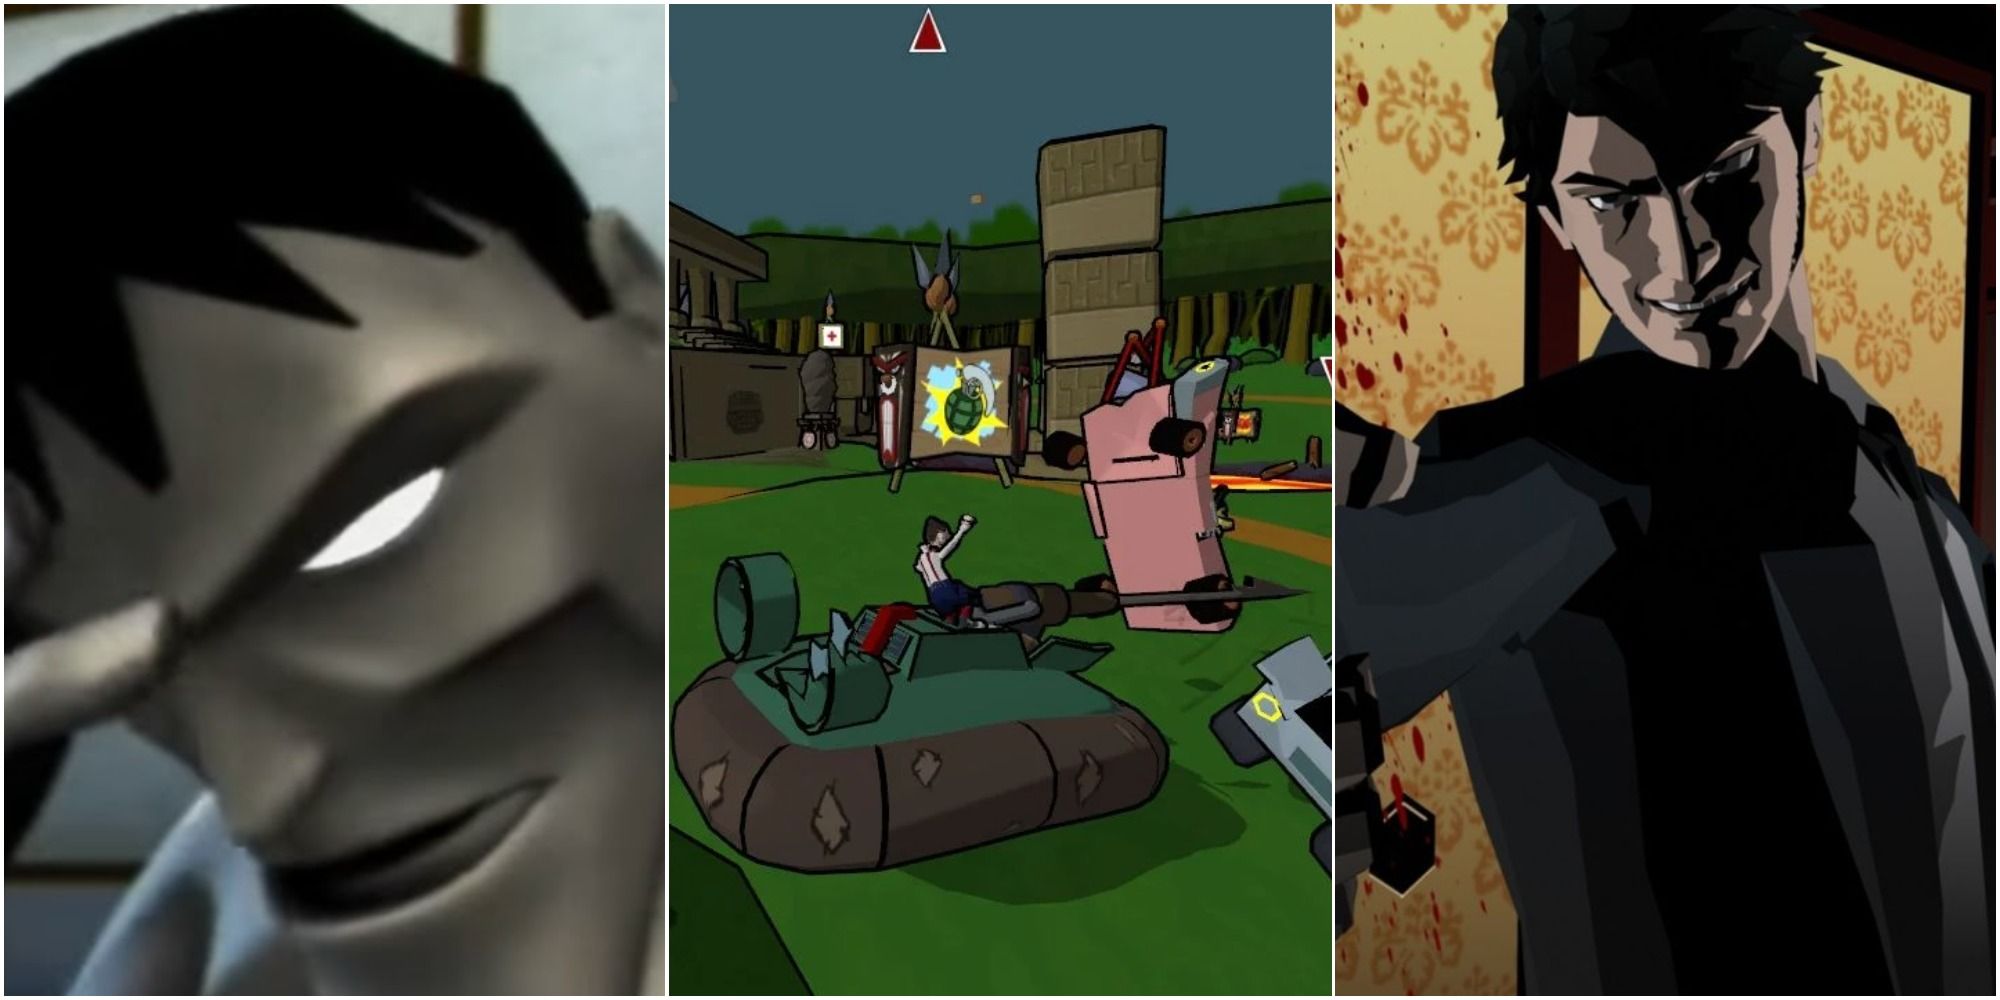 Game5Bizarre Cel-Shaded Games Featured - Drake And The 99 Dragons, Cel Damage, Killer 7